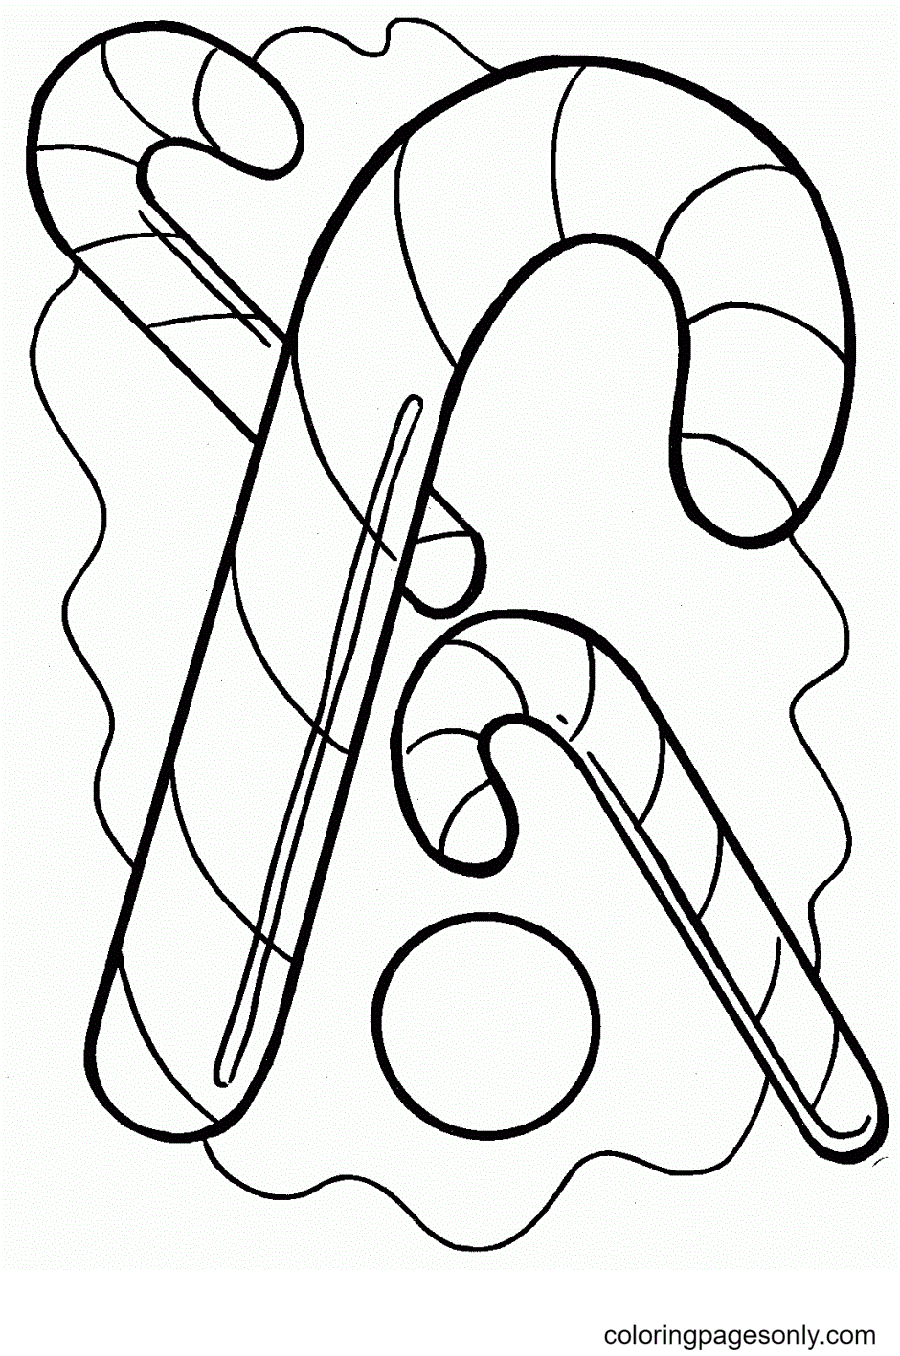 Free Christmas Candy Canes Coloring Pages